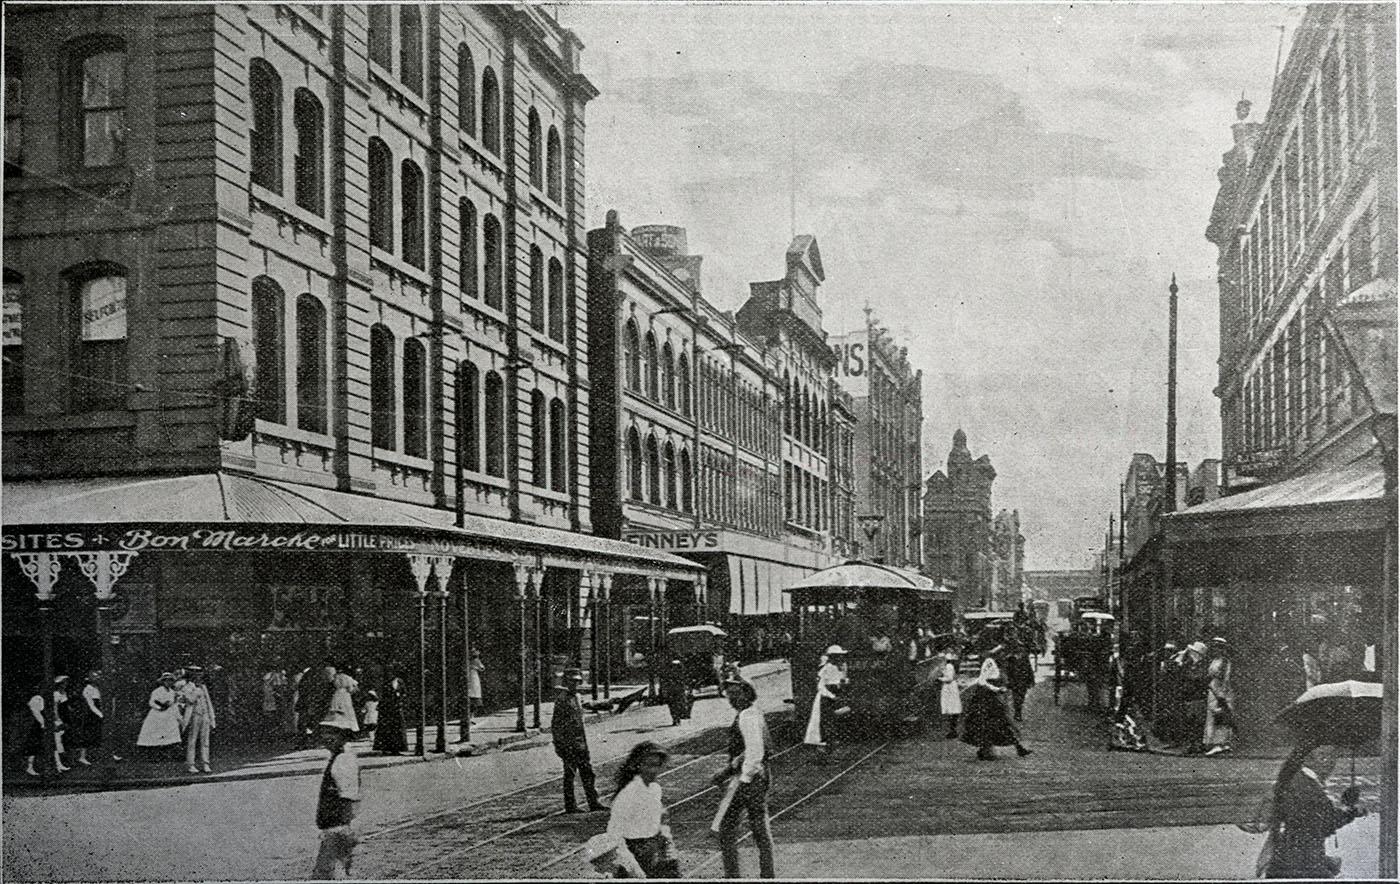 View of Adelaide Street showing people and cars down the main street